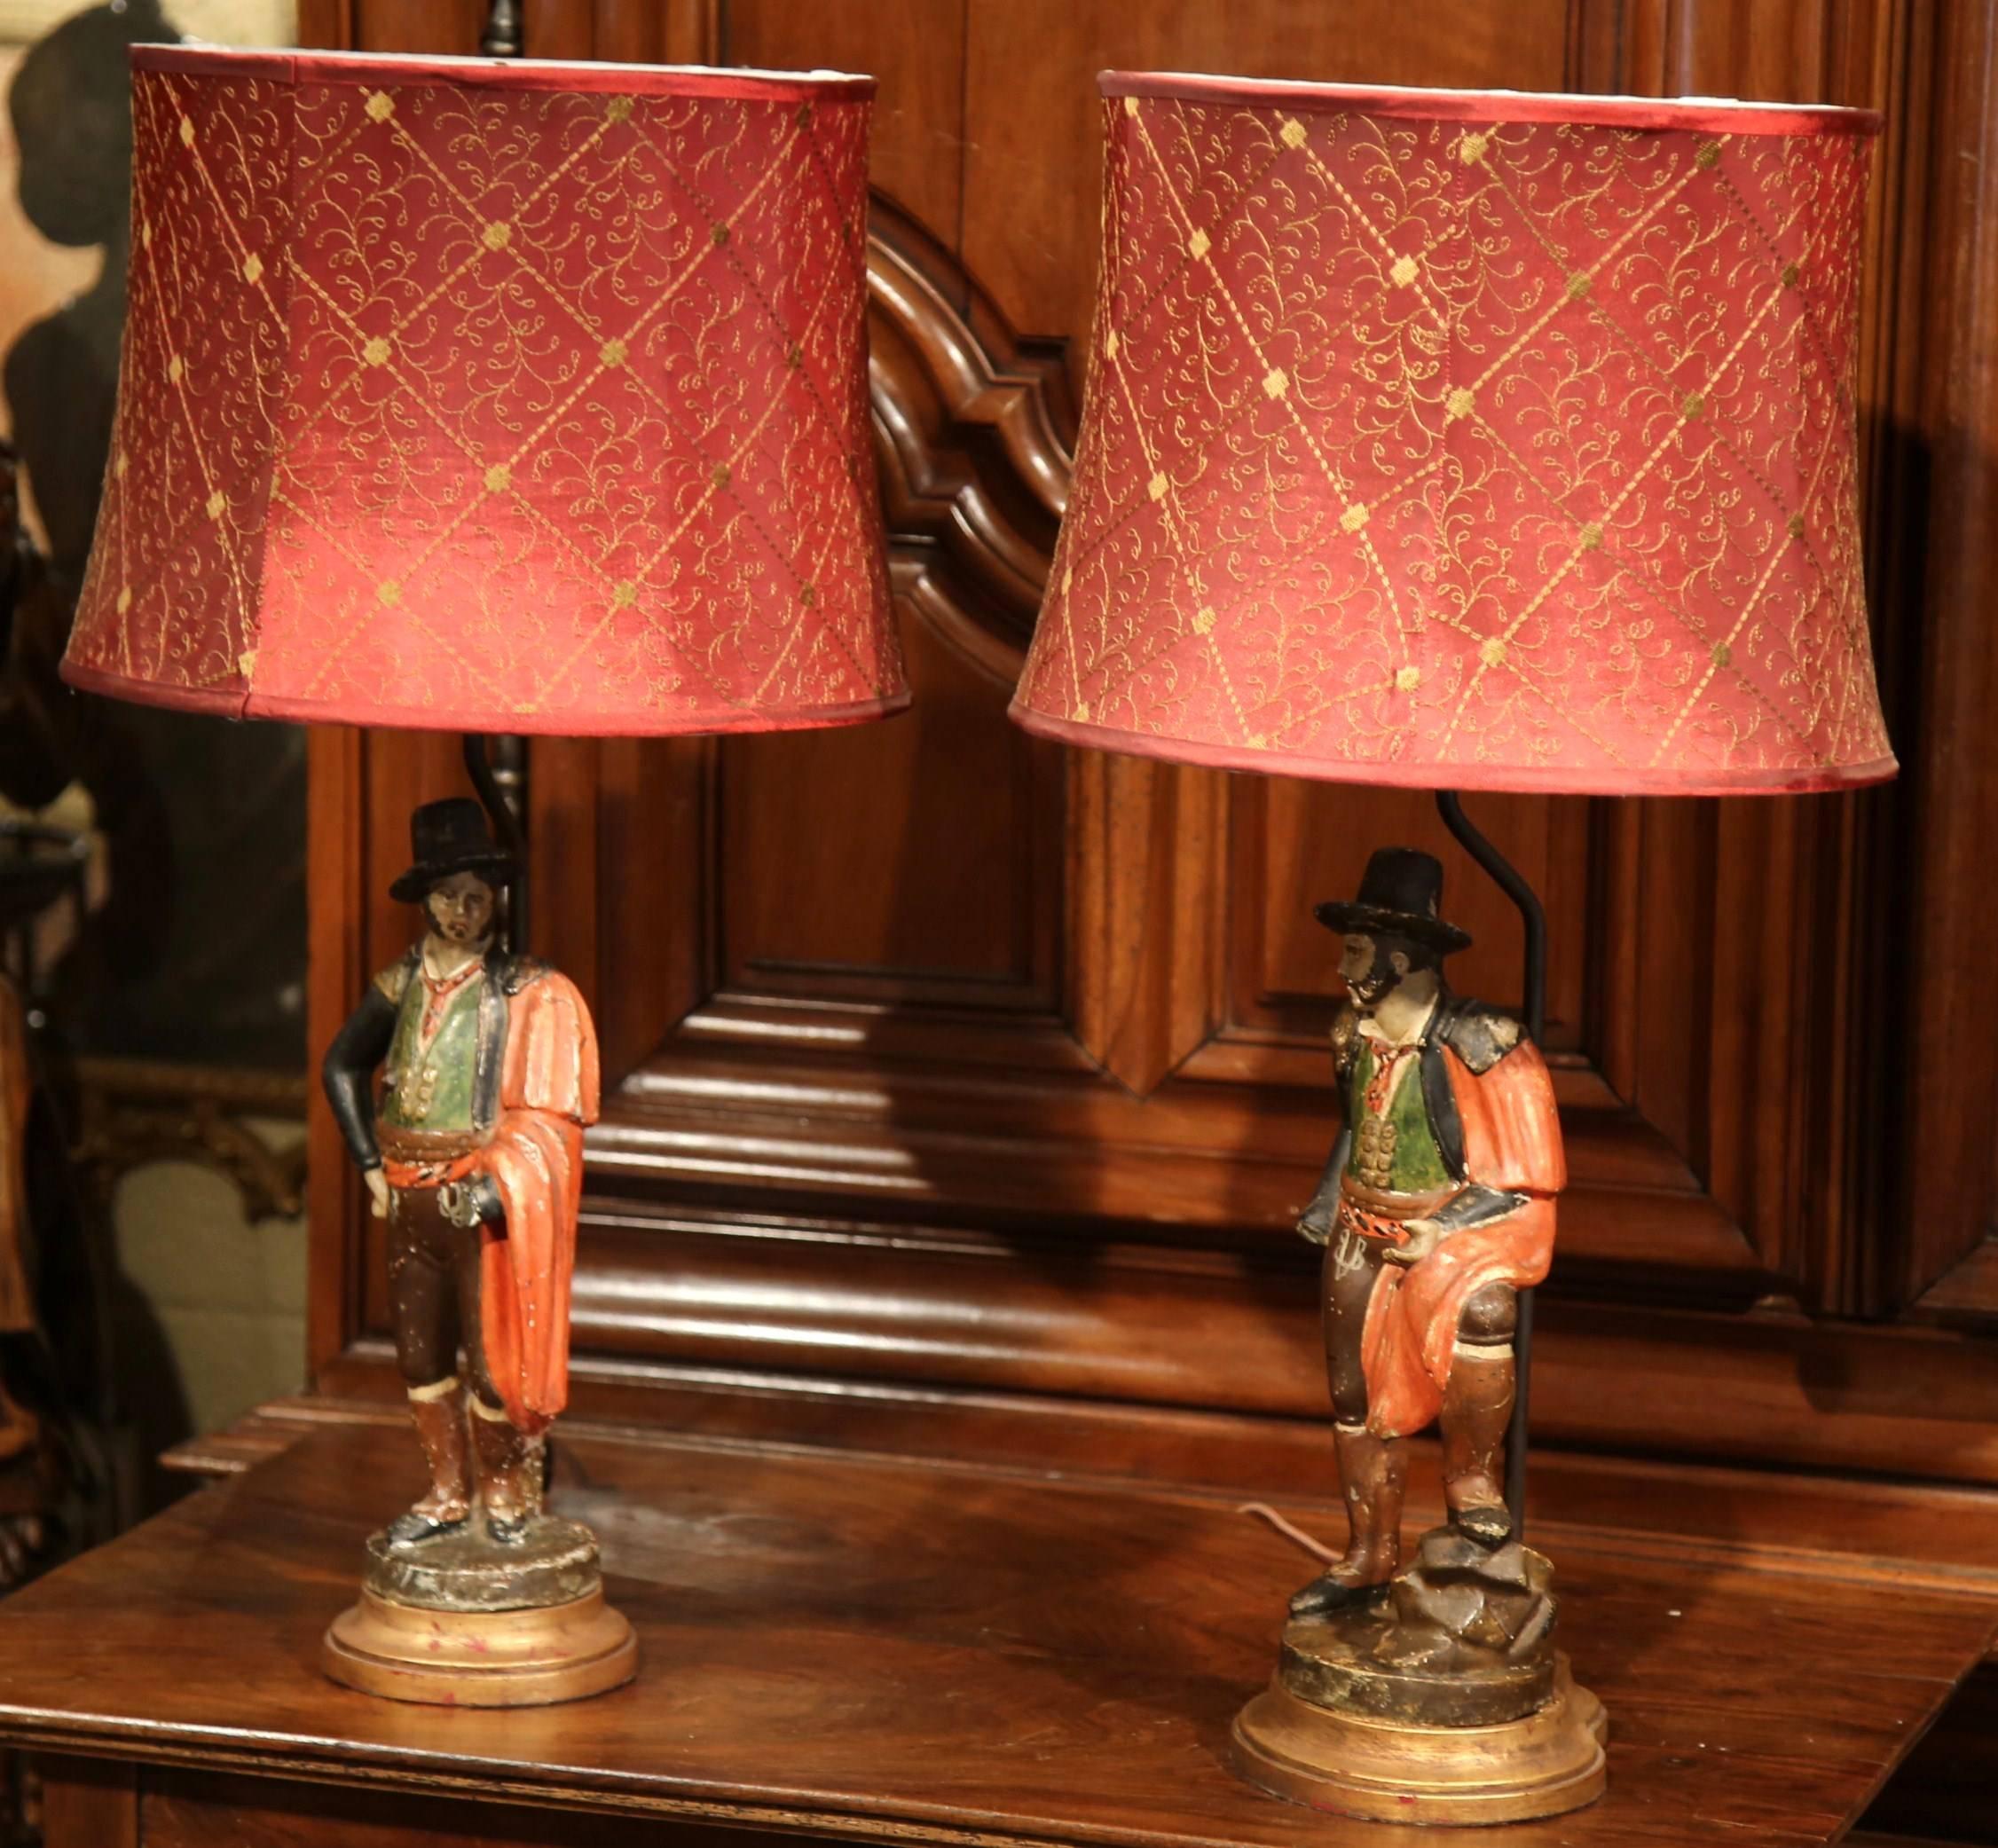 Baroque Pair of 19th Century Spanish Carved Polychrome Matadors Sculpture Table Lamps